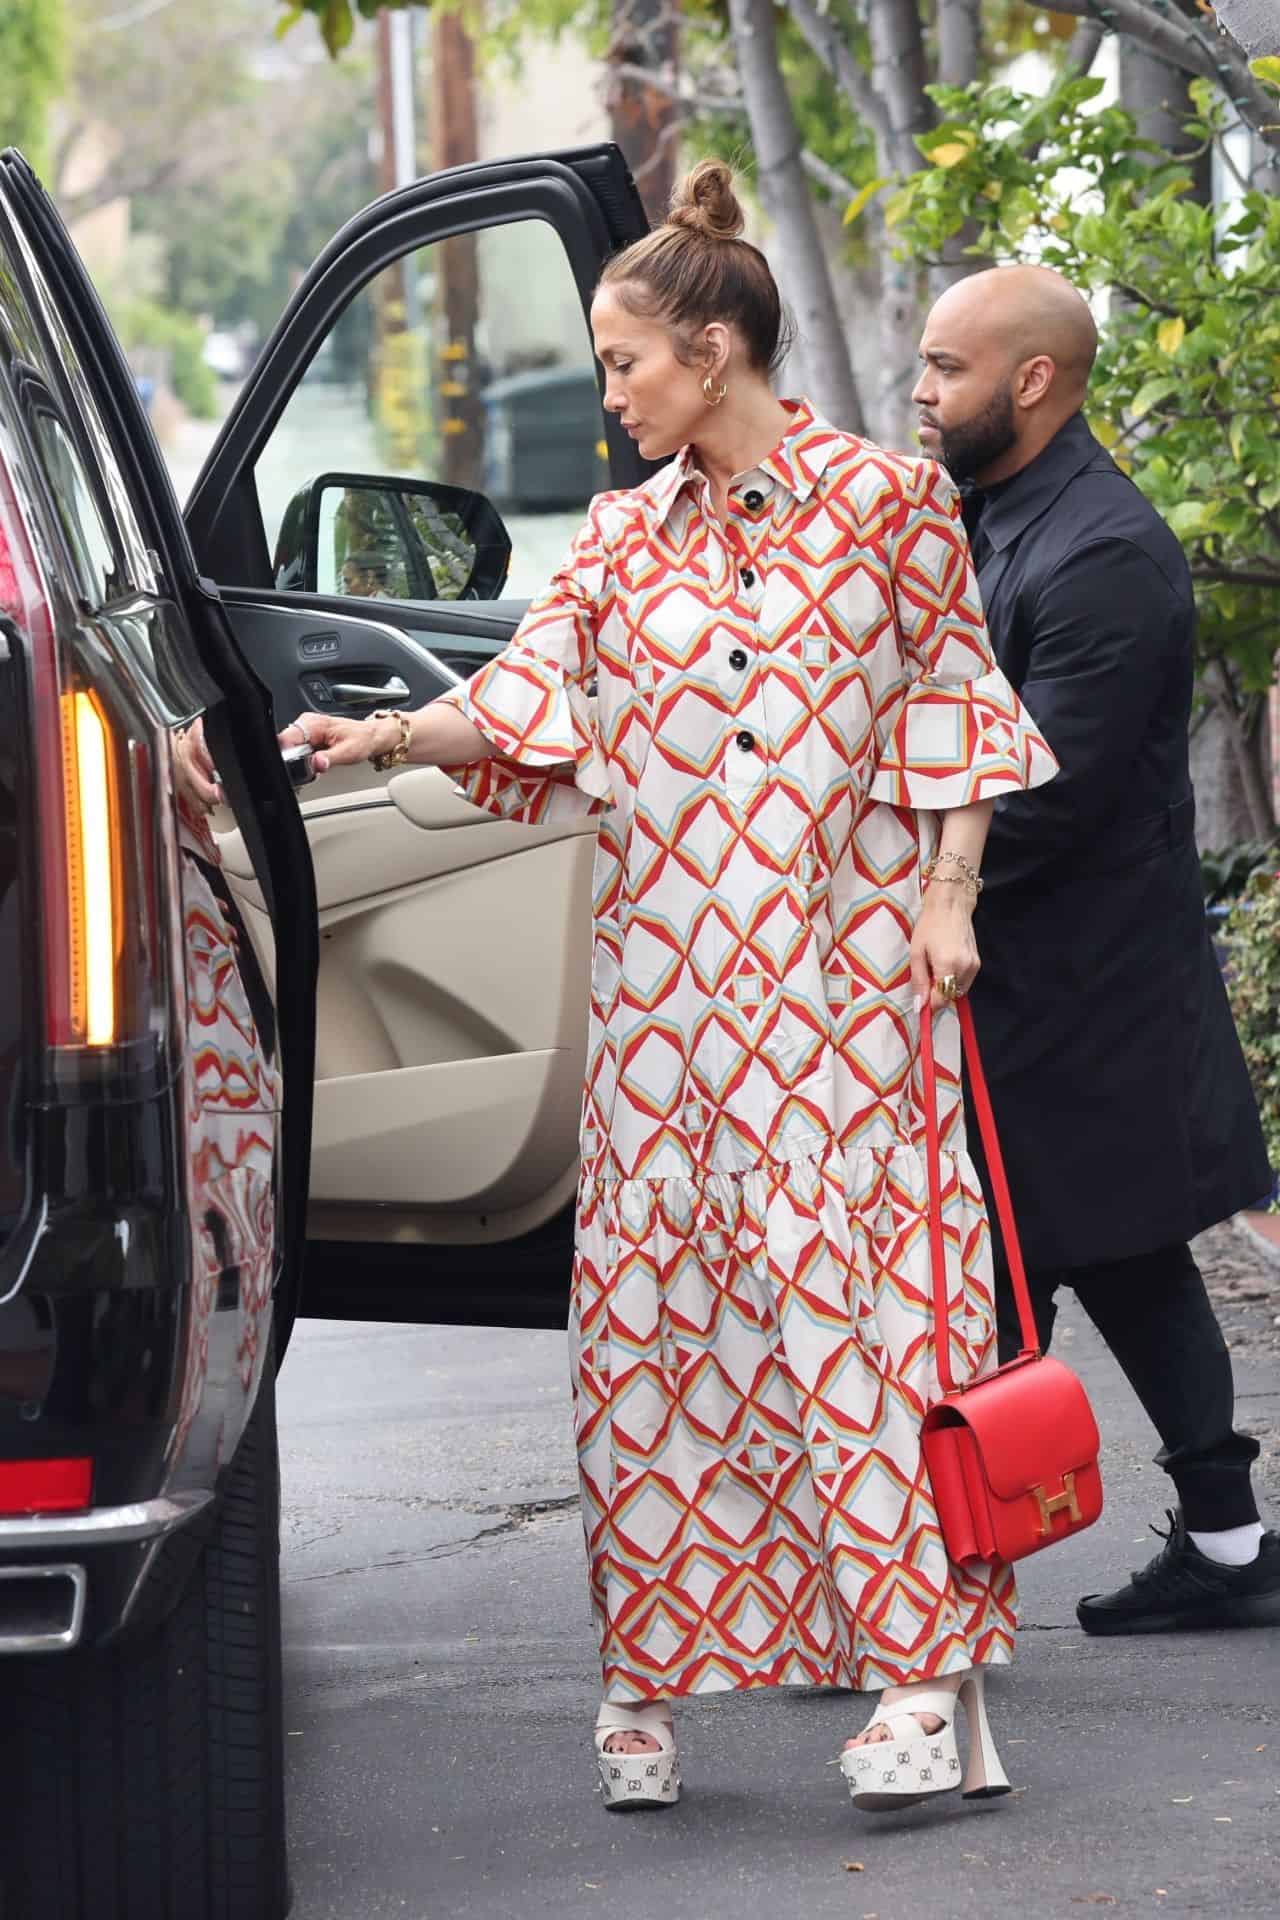 Jennifer Lopez Grabs Attention with a Vibrant and Stylish Outfit in LA